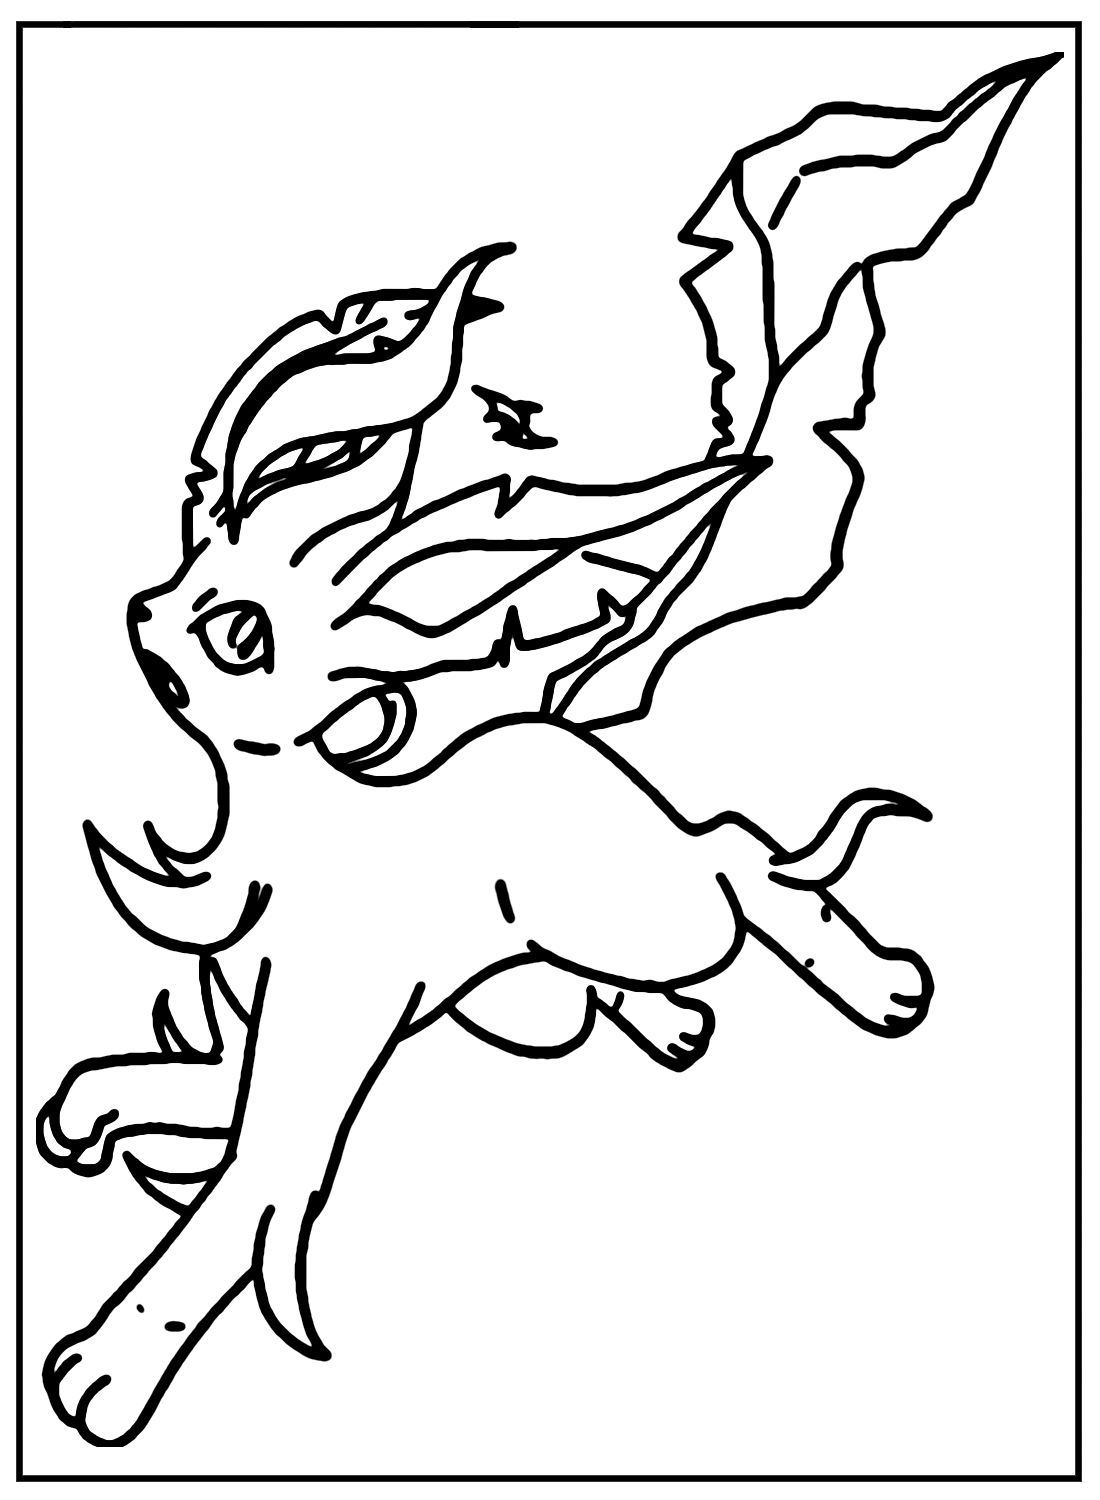 Leafeon coloring pages